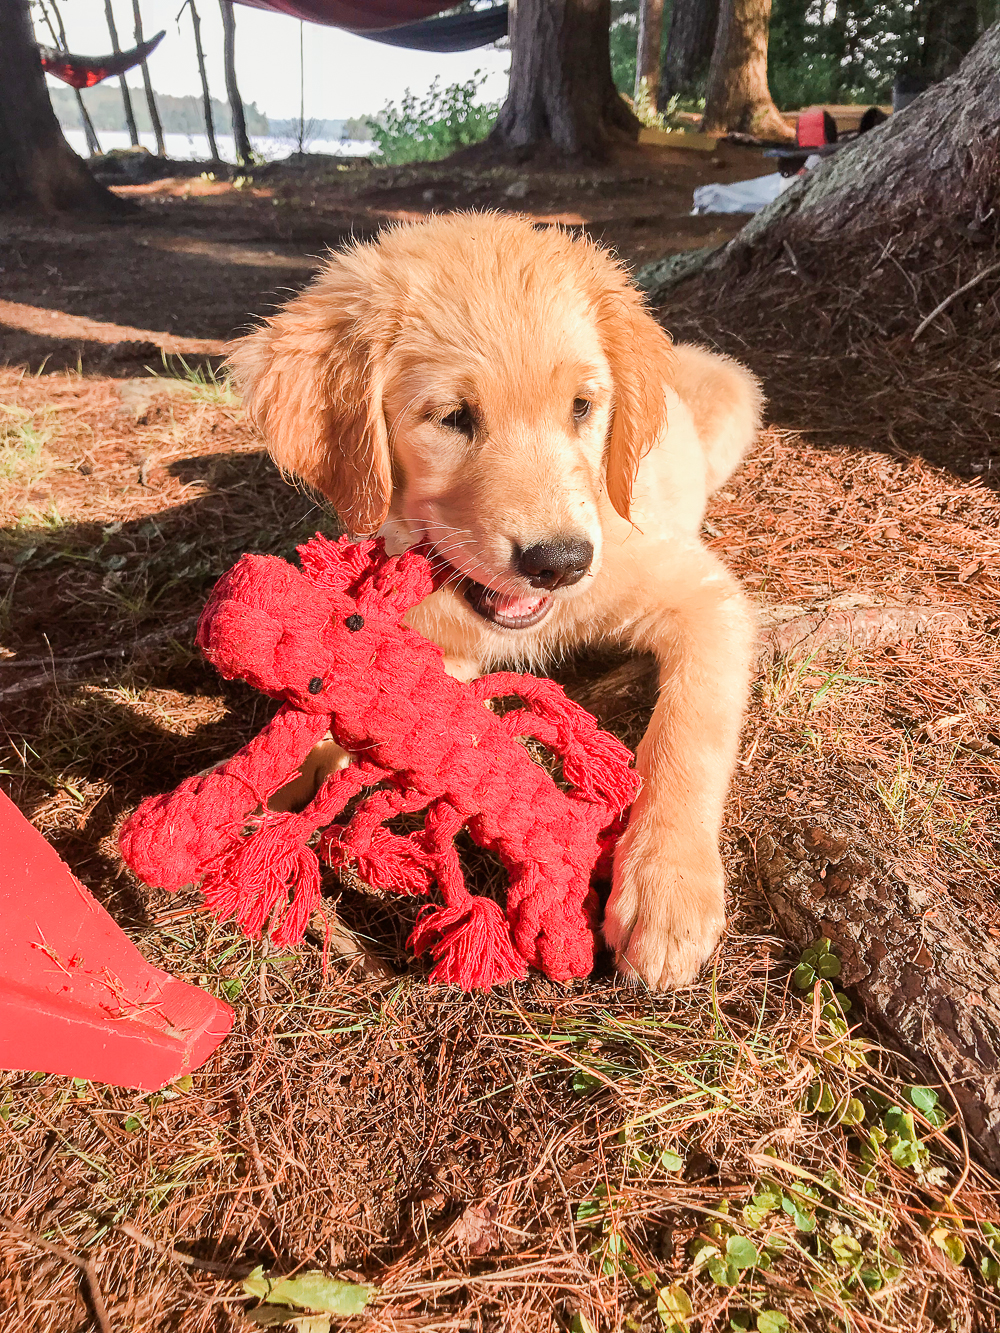 Maine vacation recap, Summer Bucket List: The Best Things to Do in Maine in Summer by southern lifestyle blogger Stephanie Ziajka from Diary of a Debutante, Maine bucket list, things to do in Maine, Lake Damariscotta, things to do in Damariscotta Maine, golden retriever with lobster toy